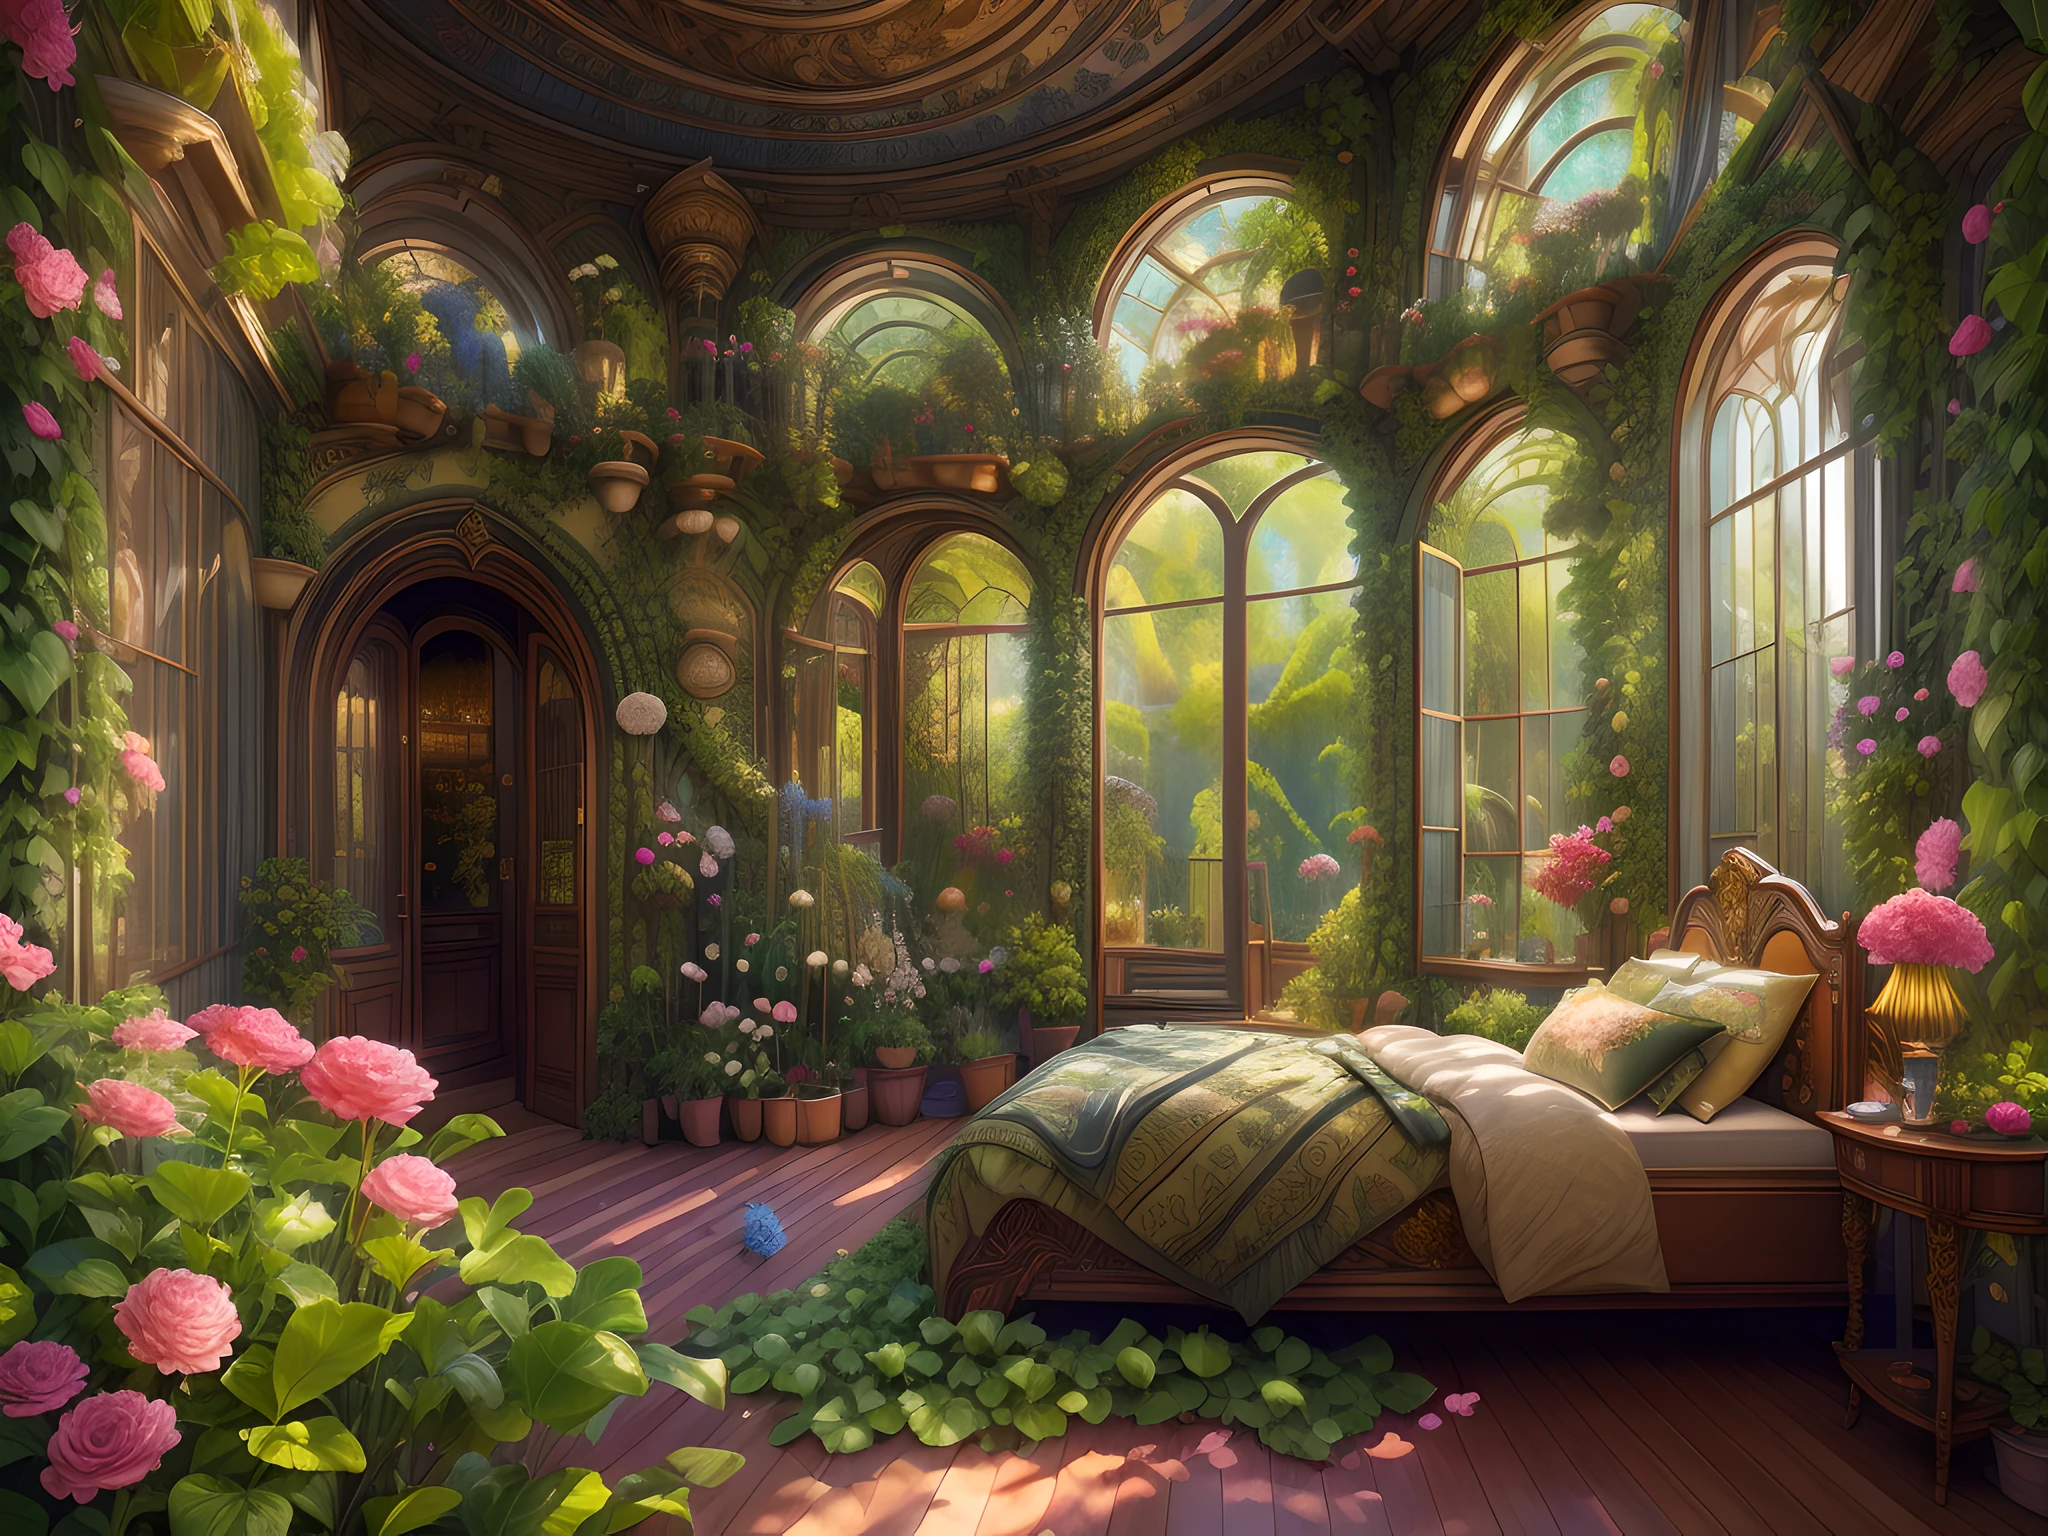 Solarpunk Dreamscape: The Royal Botanical Sanctuary | Generate an ornate botanical bedroom in the style of Versailles in a solarpunk world. There is a giant historical window in the bedroom. The giant French historical window is adorned with intricate carvings and dominates one wall. Through the massive window, a colorful and intricate solarpunk cityscape is visible. The cityscape is bustling and interesting, with many small details and high visual interest. The bedroom is peaceful, with many elegant flowers and flowered ivy among the rich silk fabric and hardwood floor. Take inspiration from rooftop gardens, royal french gardens, beautiful rose gardens, and whimsical fantasy. Include beautiful fantasy details and touches, including fantasy water, books, 3D touches, and delicate tendrils of ivy. Camera: Utilize innovative lighting techniques to emphasize the realism and beauty of the image. Delicate flower petals from floating flowers dance through the air. Utilize dynamic composition to create a compelling image.